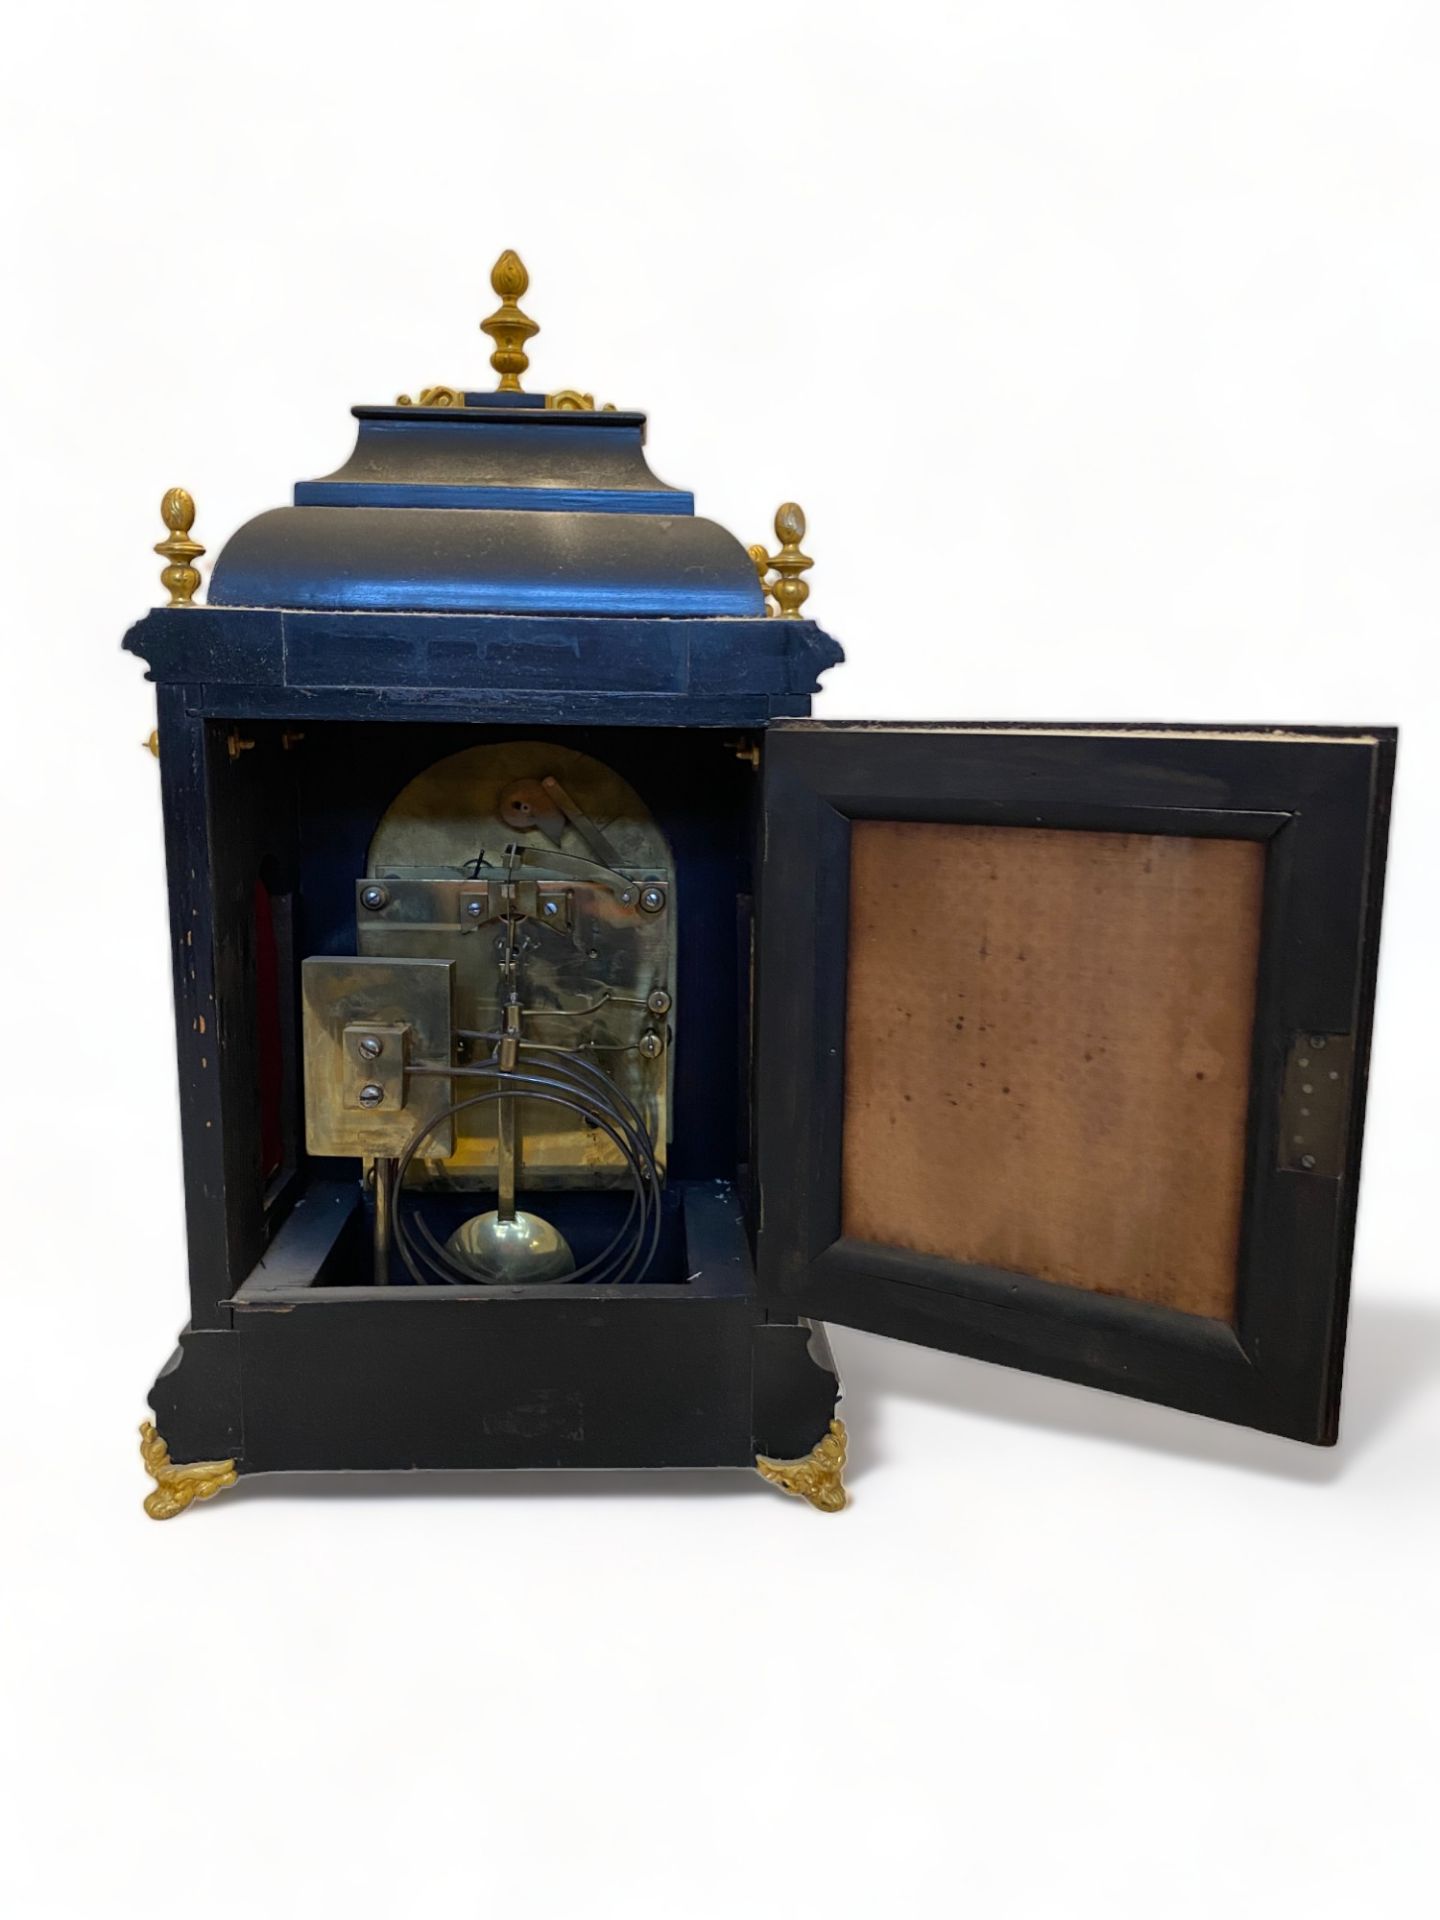 A late 19th century German ebonised and gilt metal mounted bracket clock and bracket by Winterhalder - Image 7 of 9